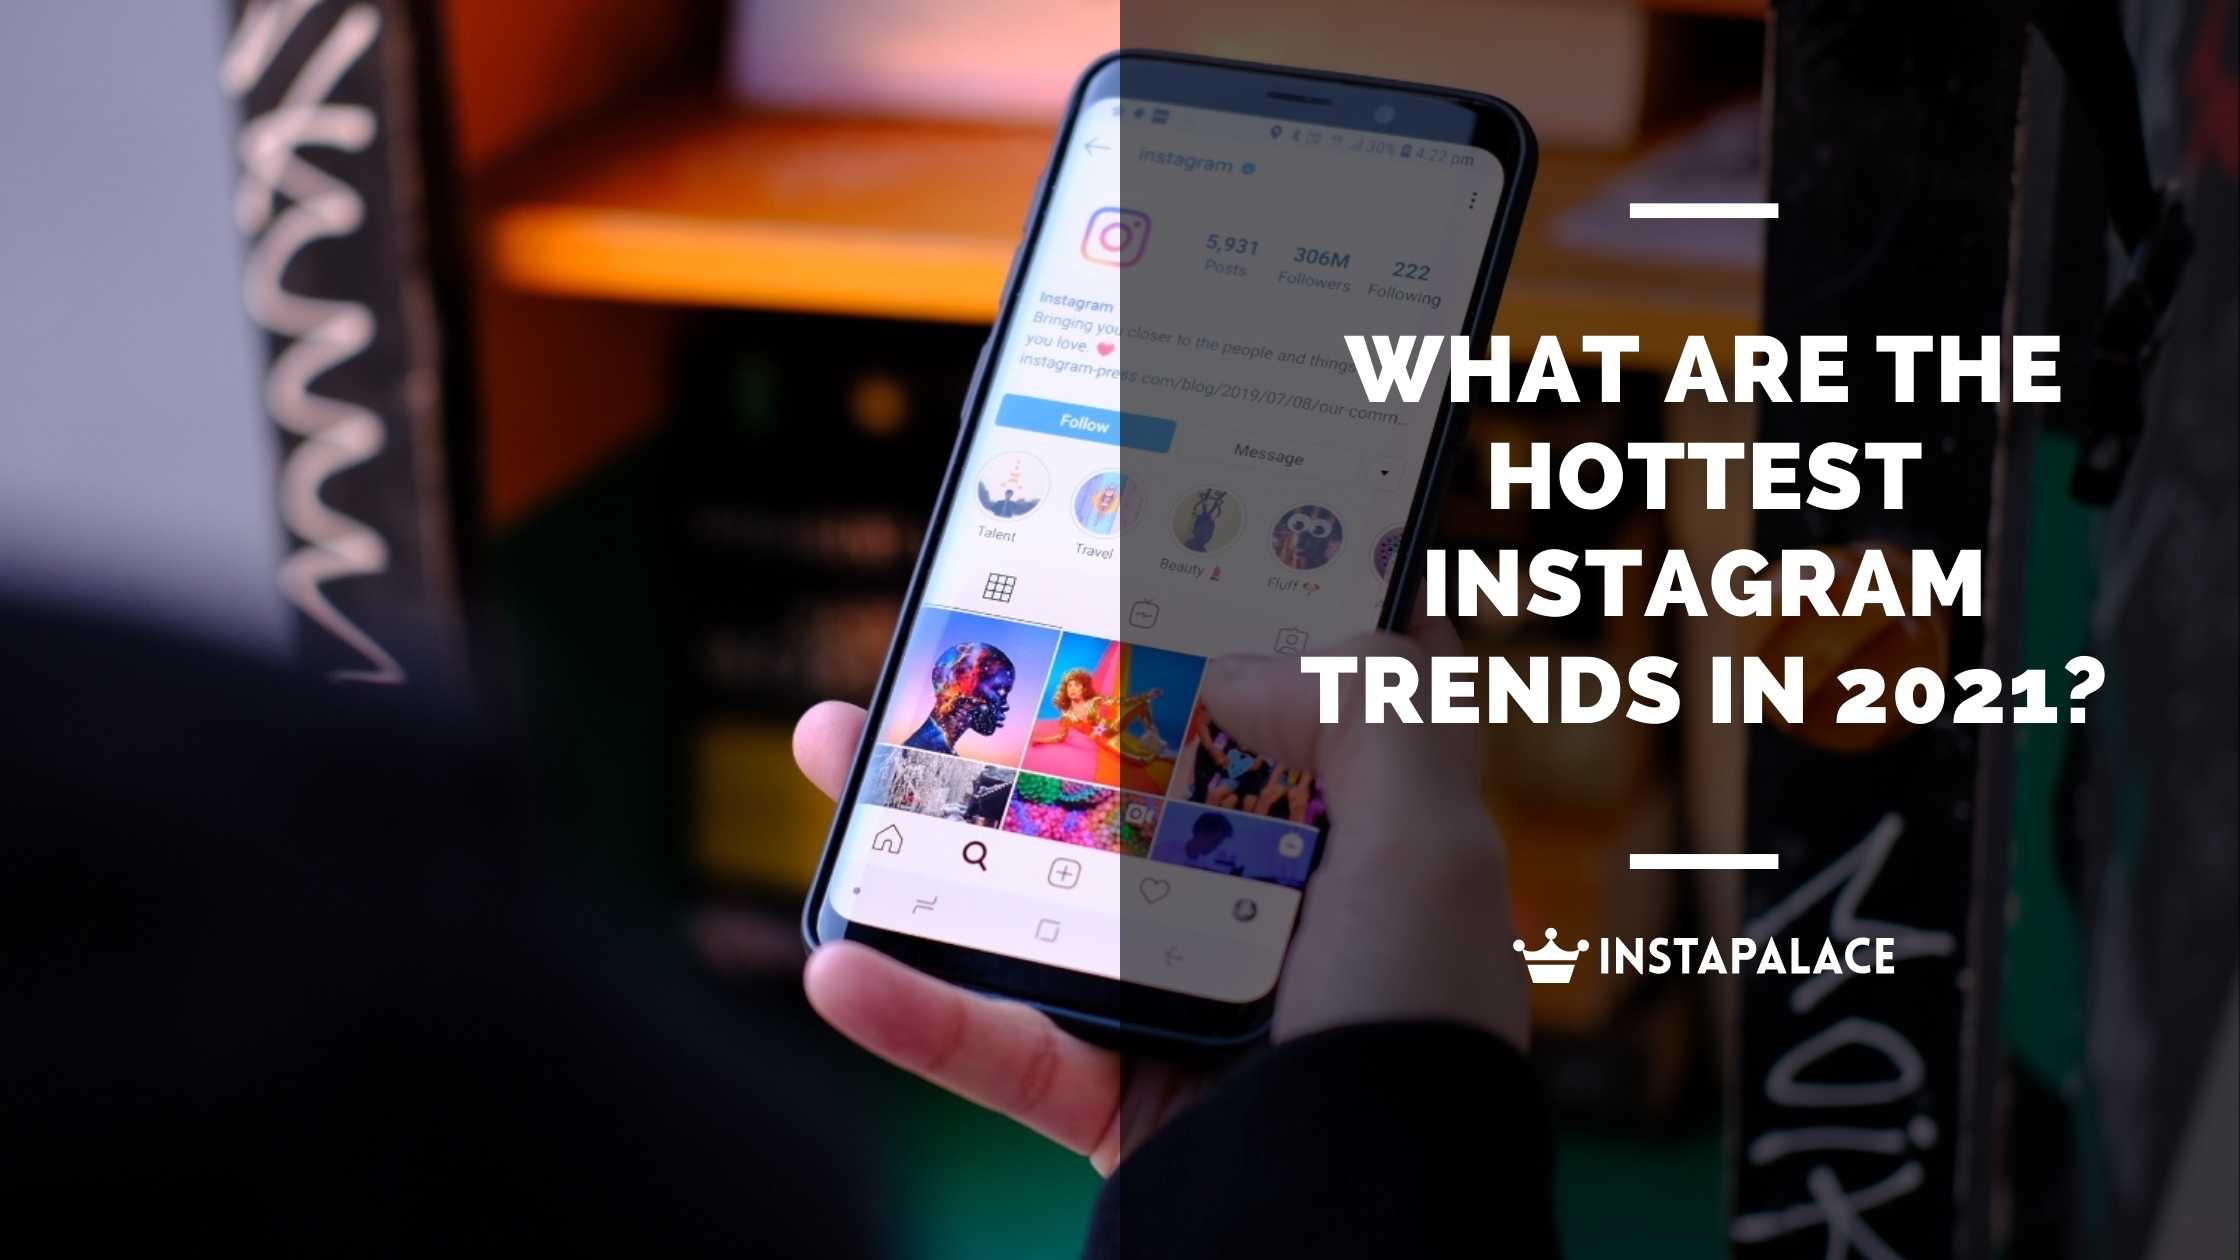 The Hottest Instagram Trends In 2021